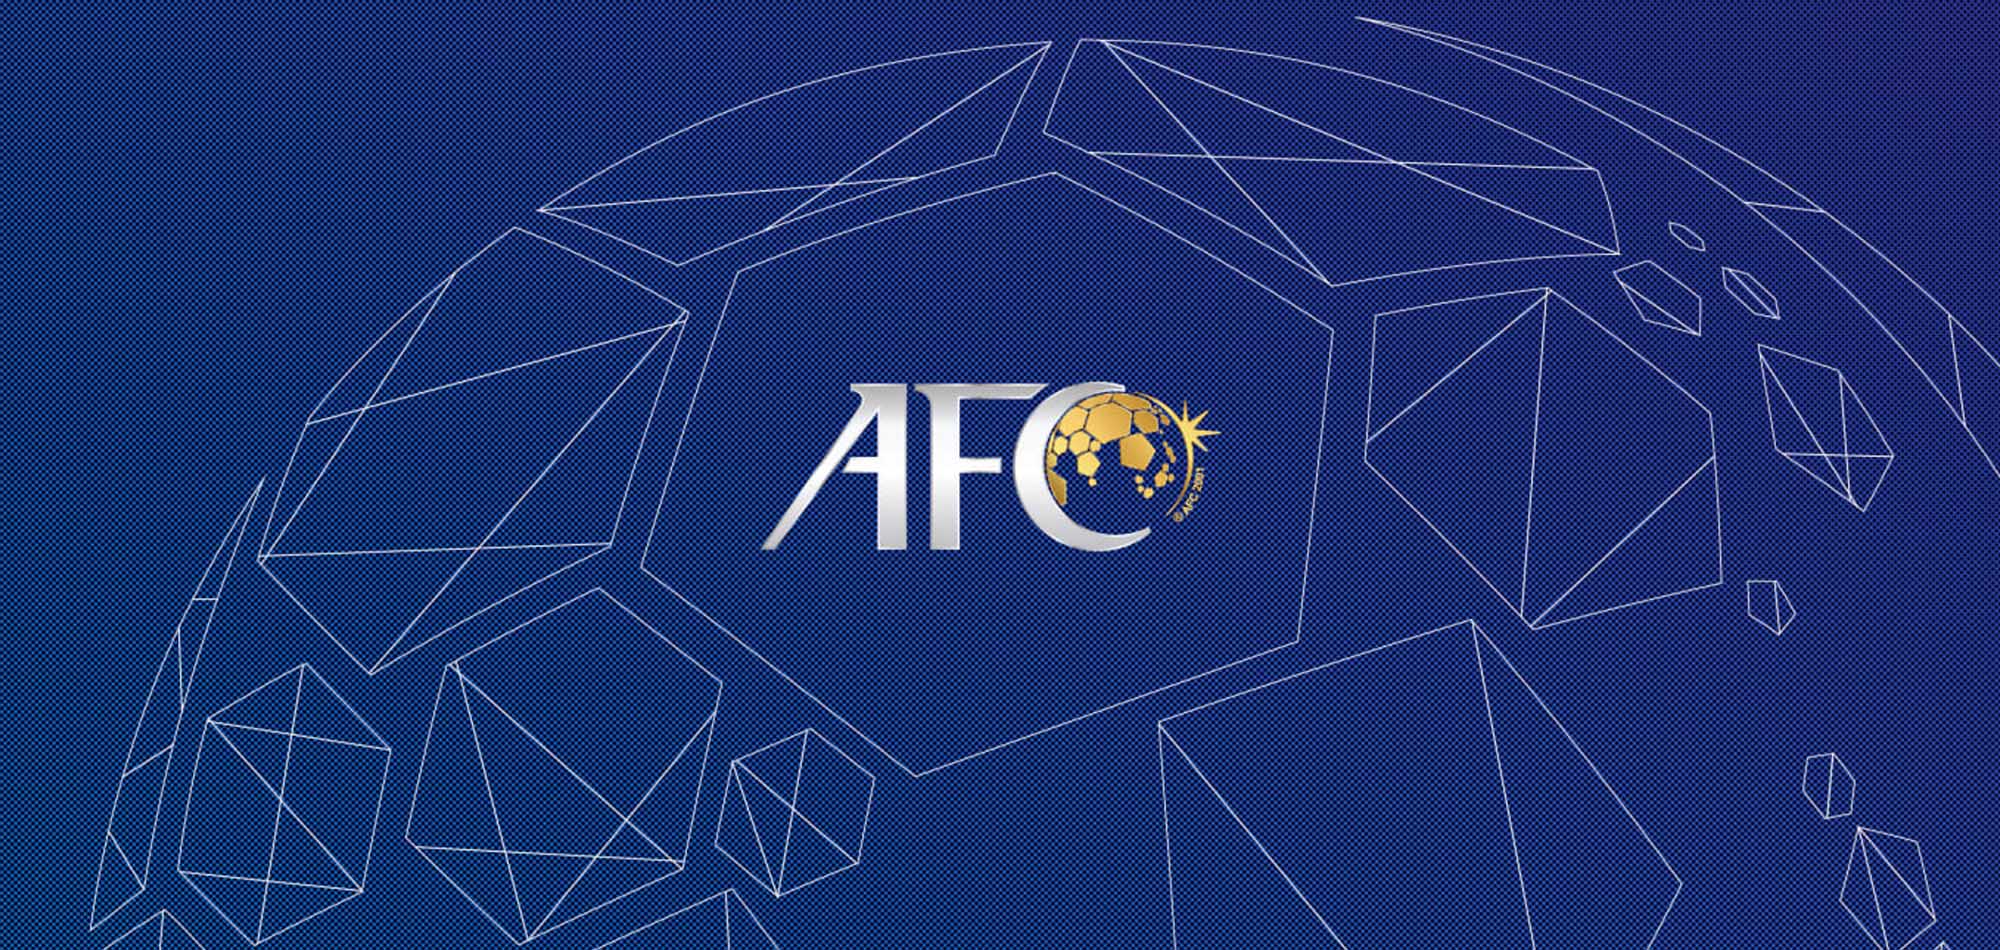 AFC: Latest update on AFC Champions League (West)